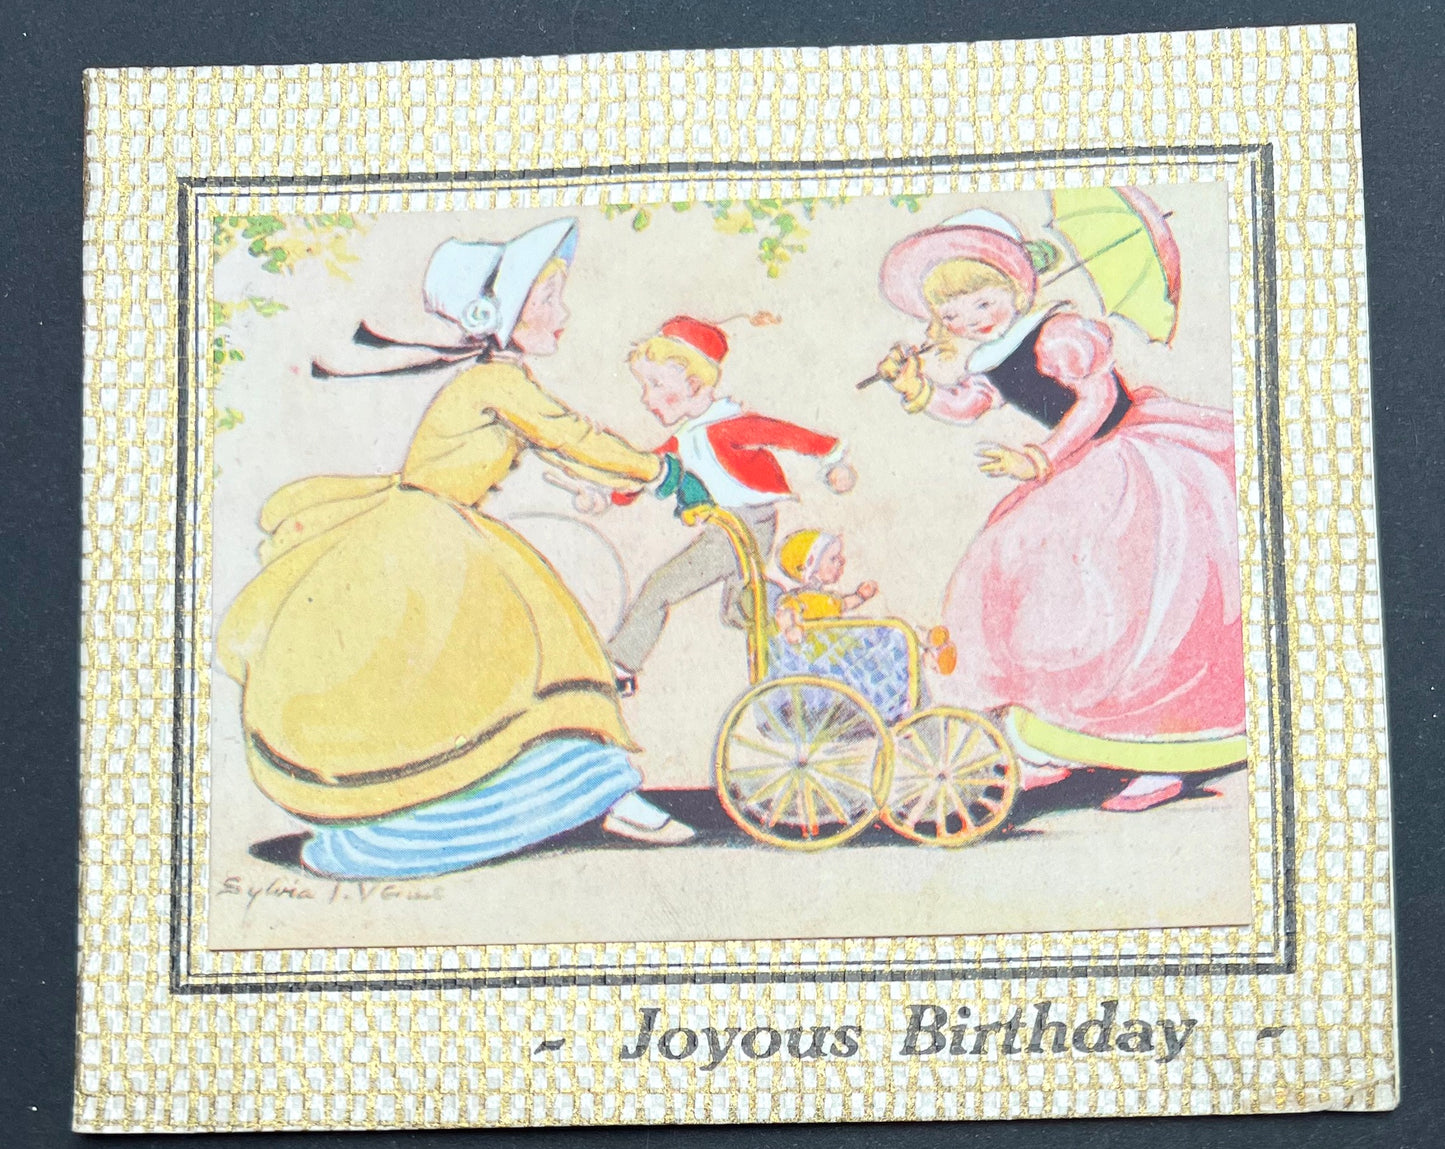 Greeting the Baby on 1940s Birthday Card